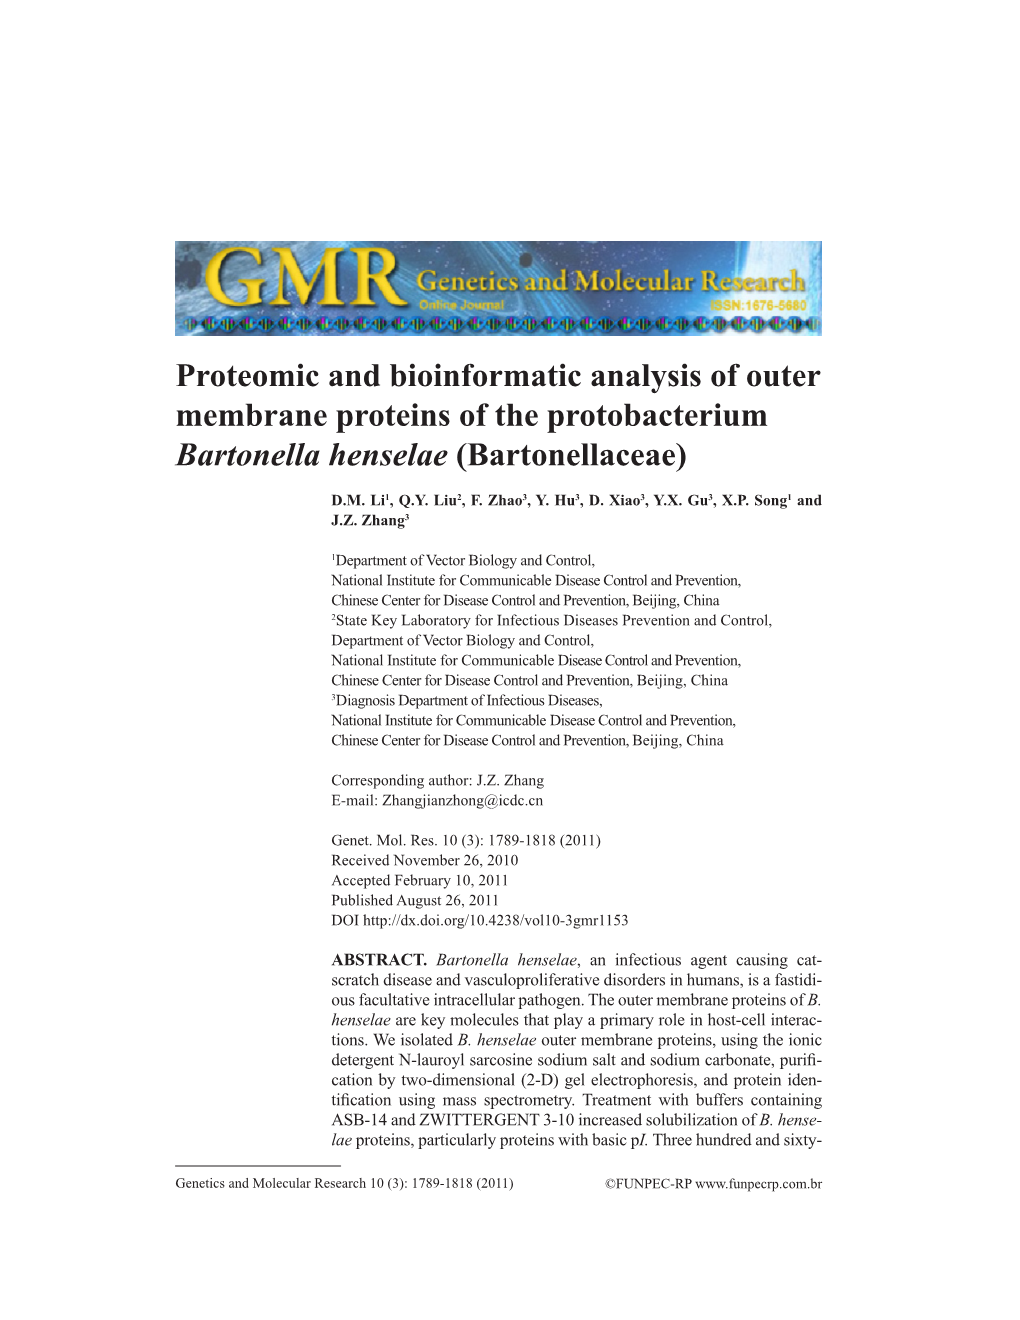 Proteomic and Bioinformatic Analysis of Outer Membrane Proteins of the Protobacterium Bartonella Henselae (Bartonellaceae)